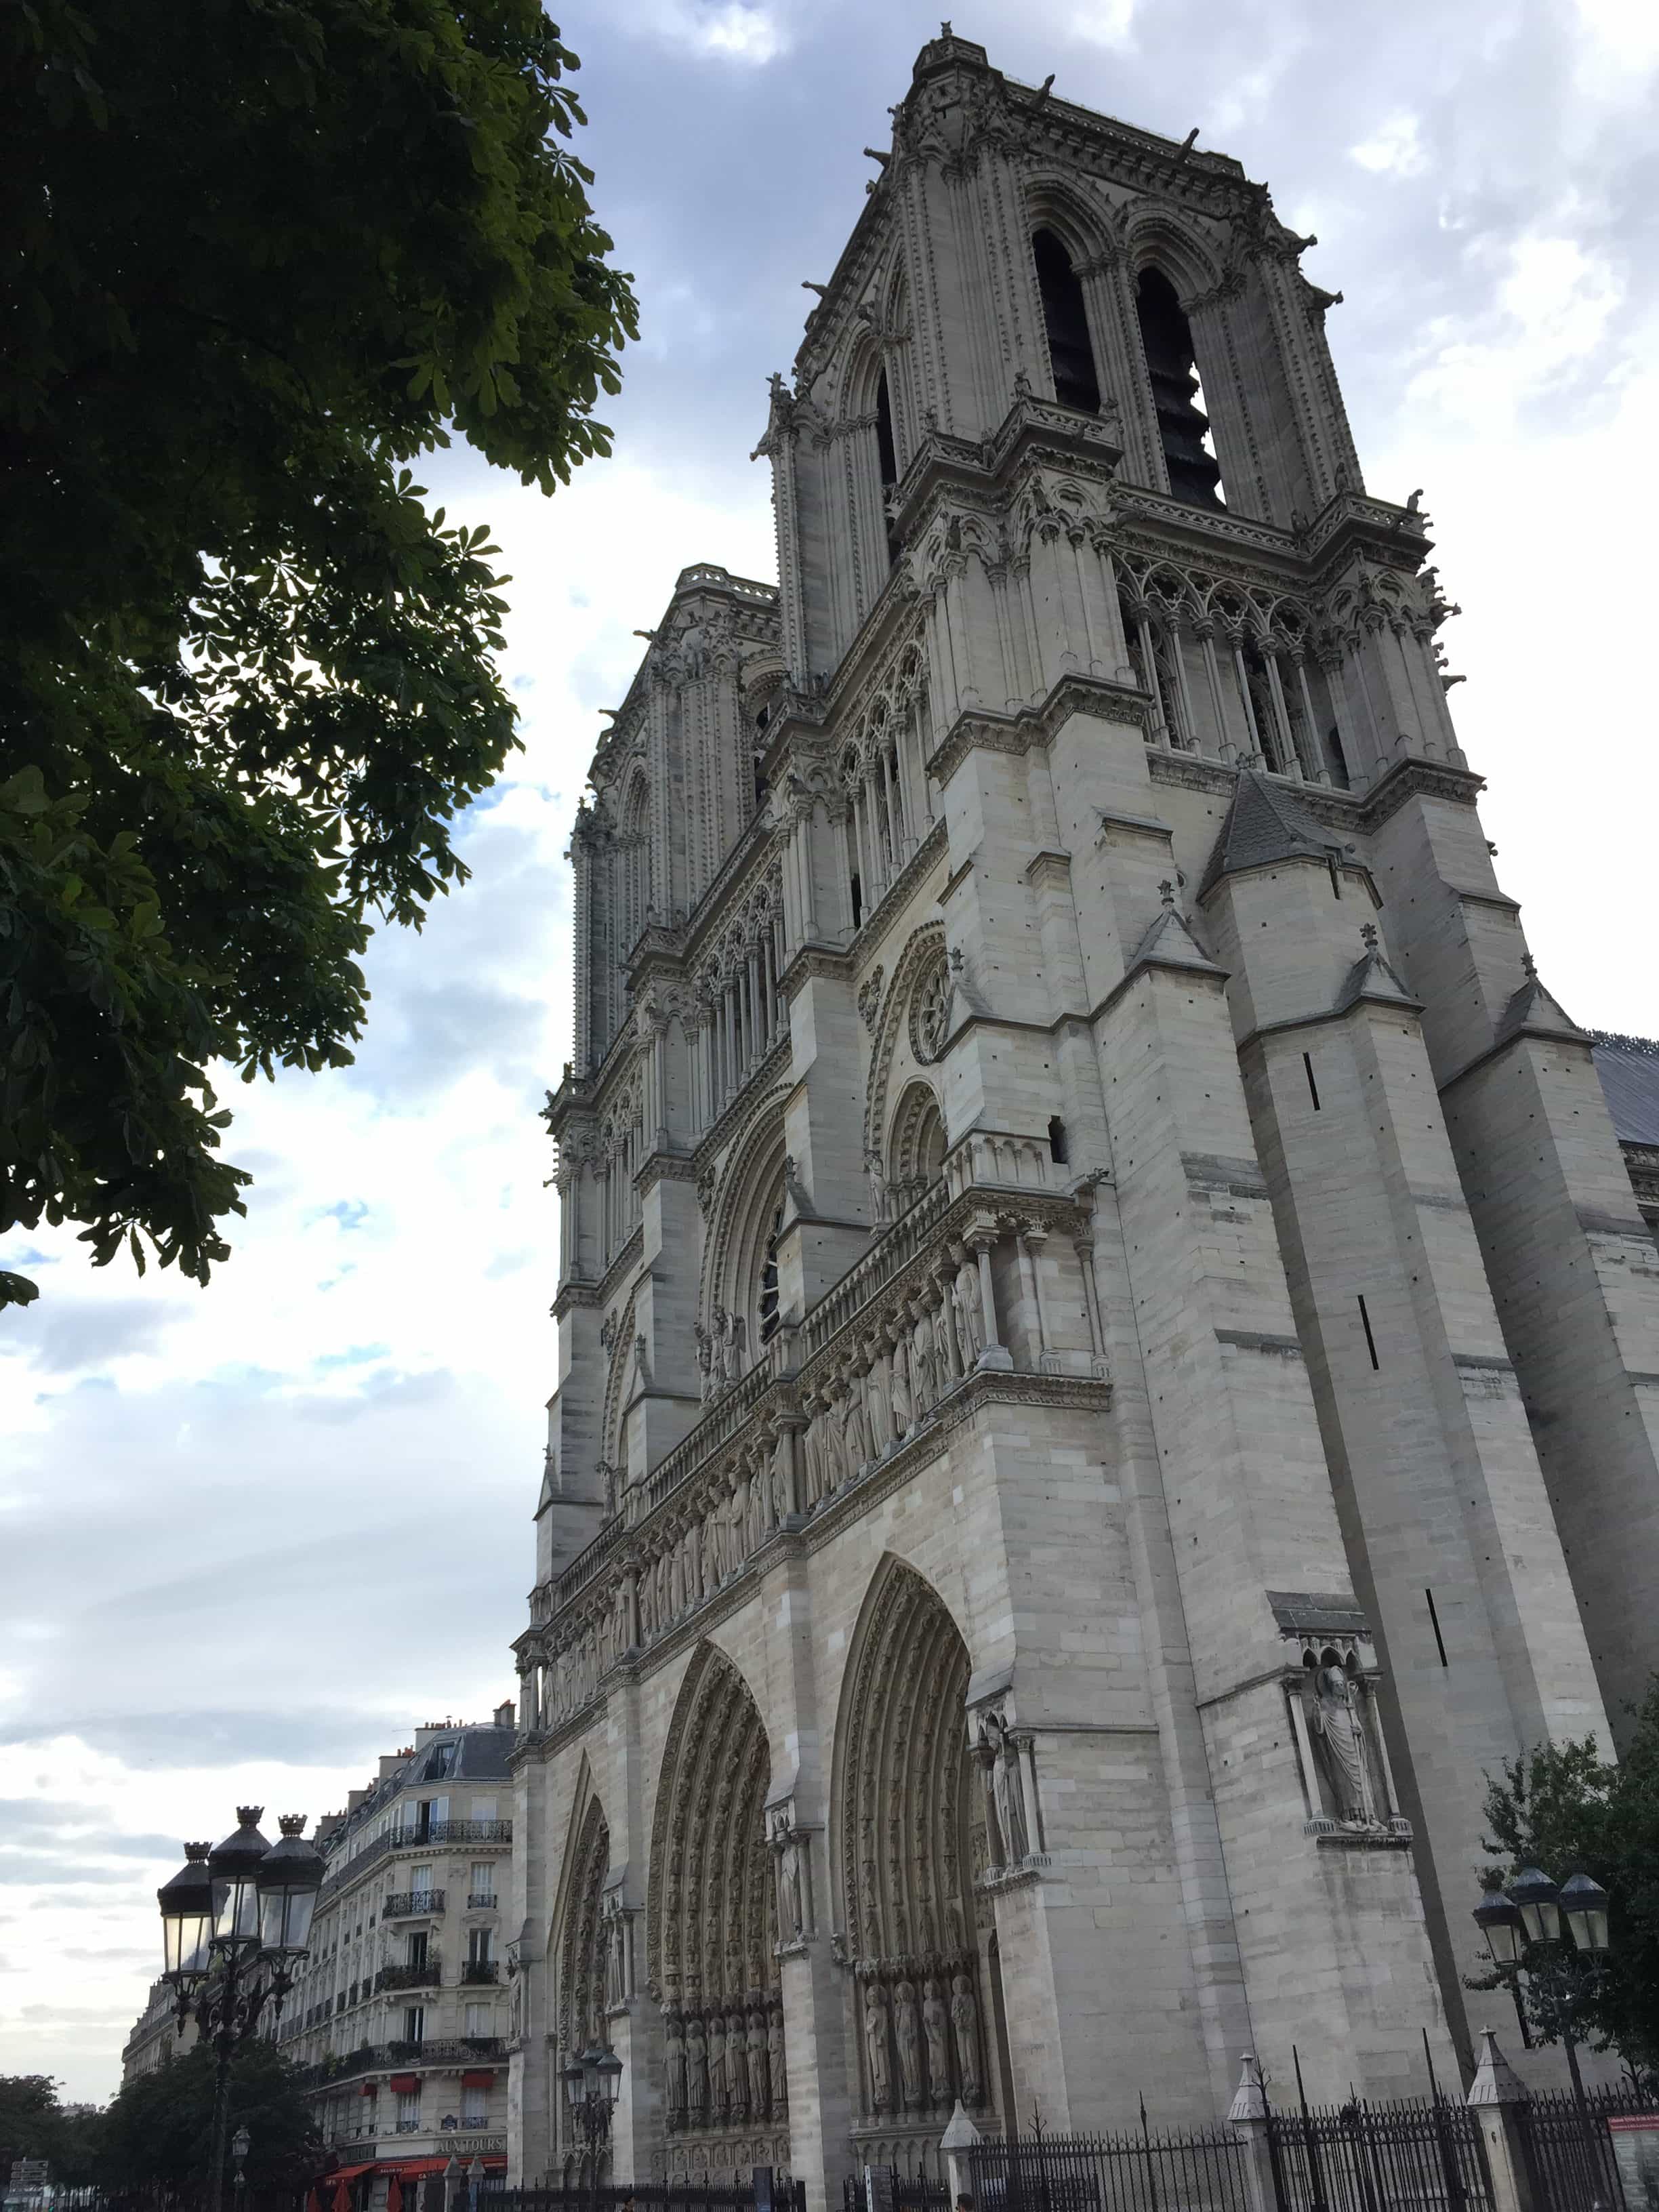 The Notre Dame